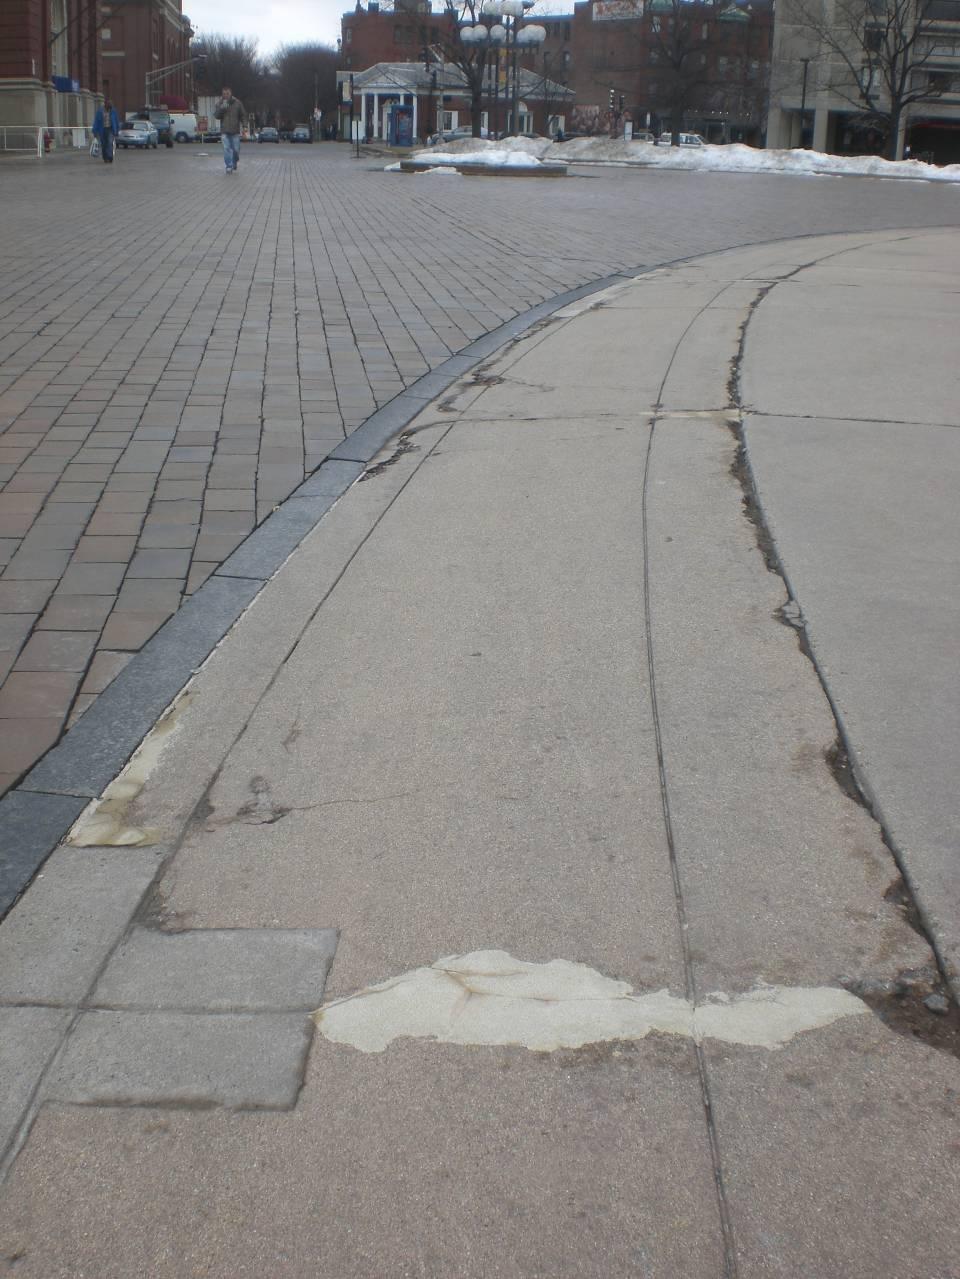 Deteriorated Paving Condition The